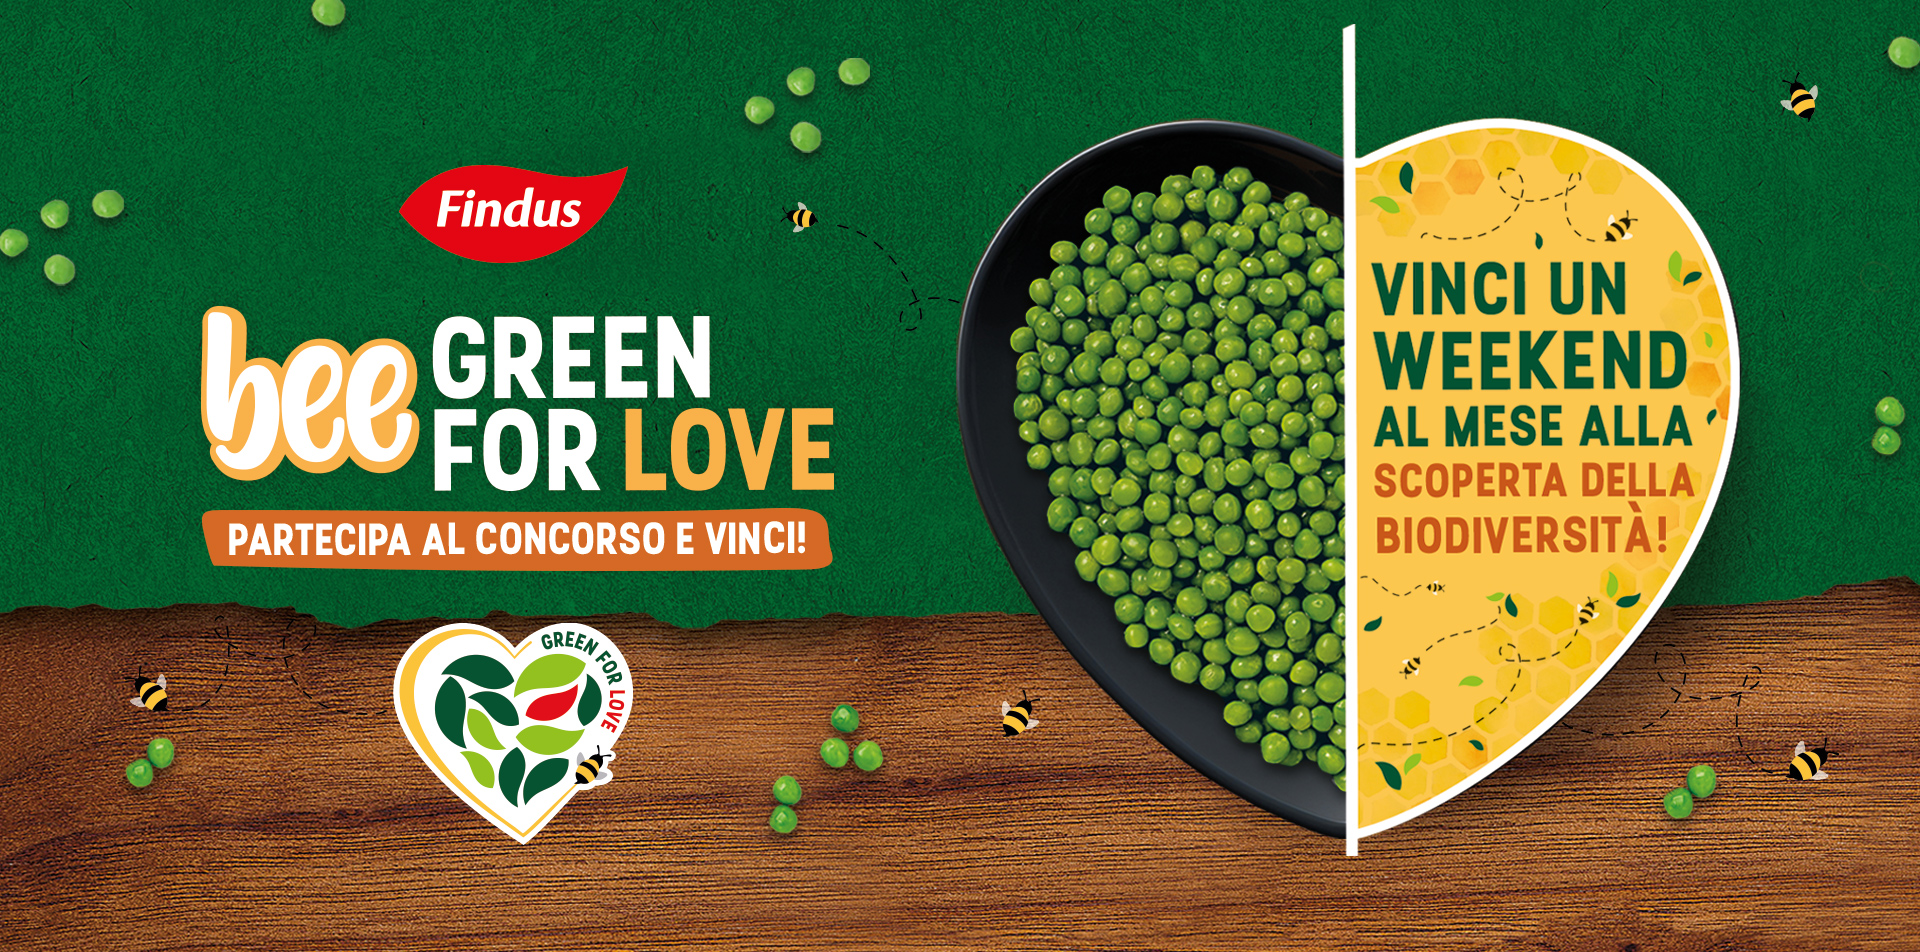 findus bee green for love